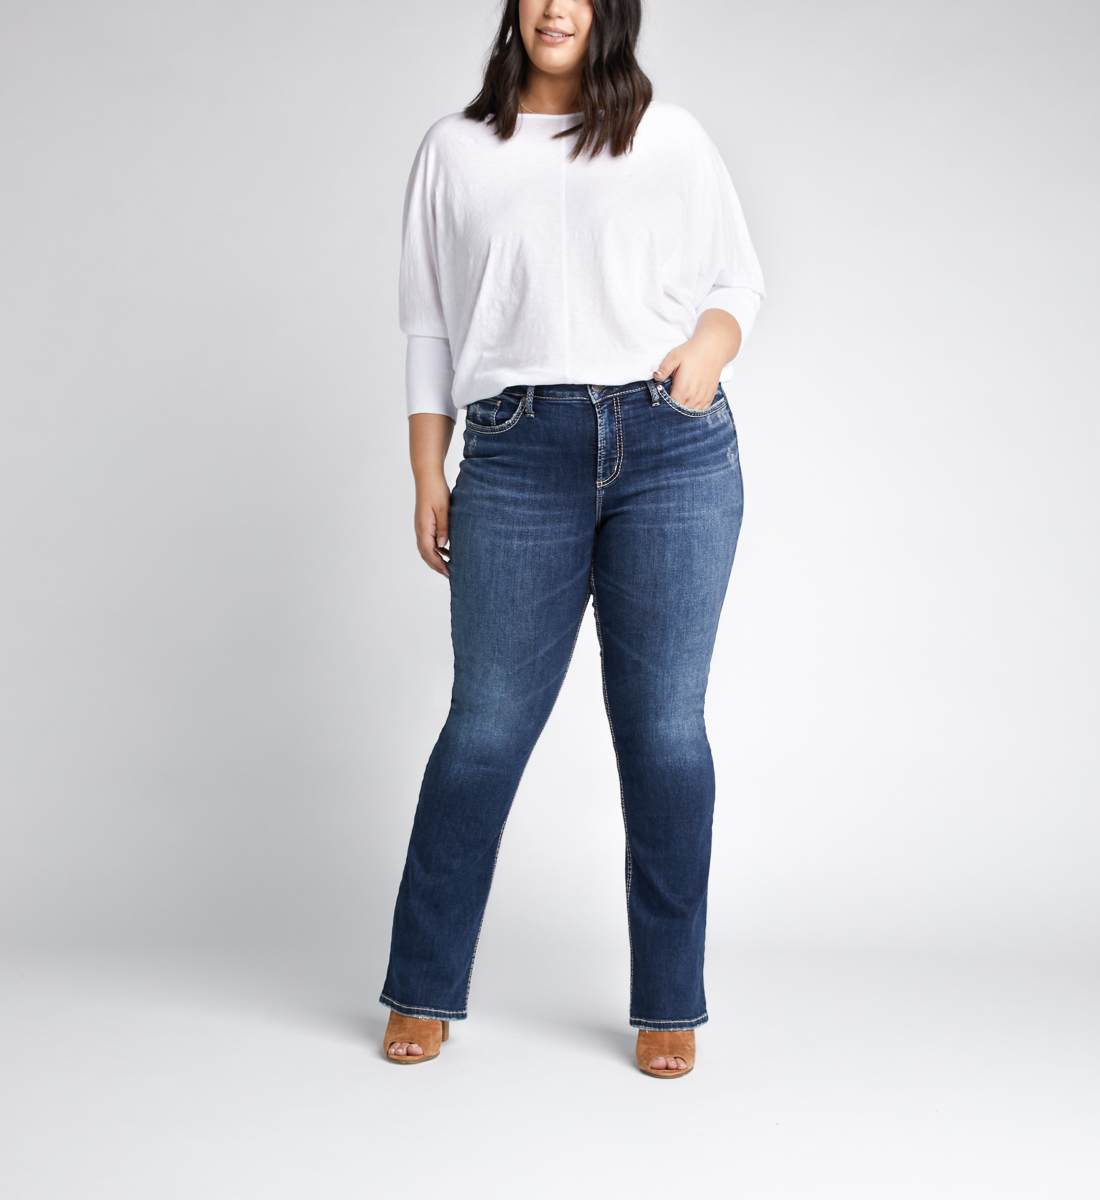 Avery High Rise Slim Bootcut Jeans Plus Size - Silver Jeans US